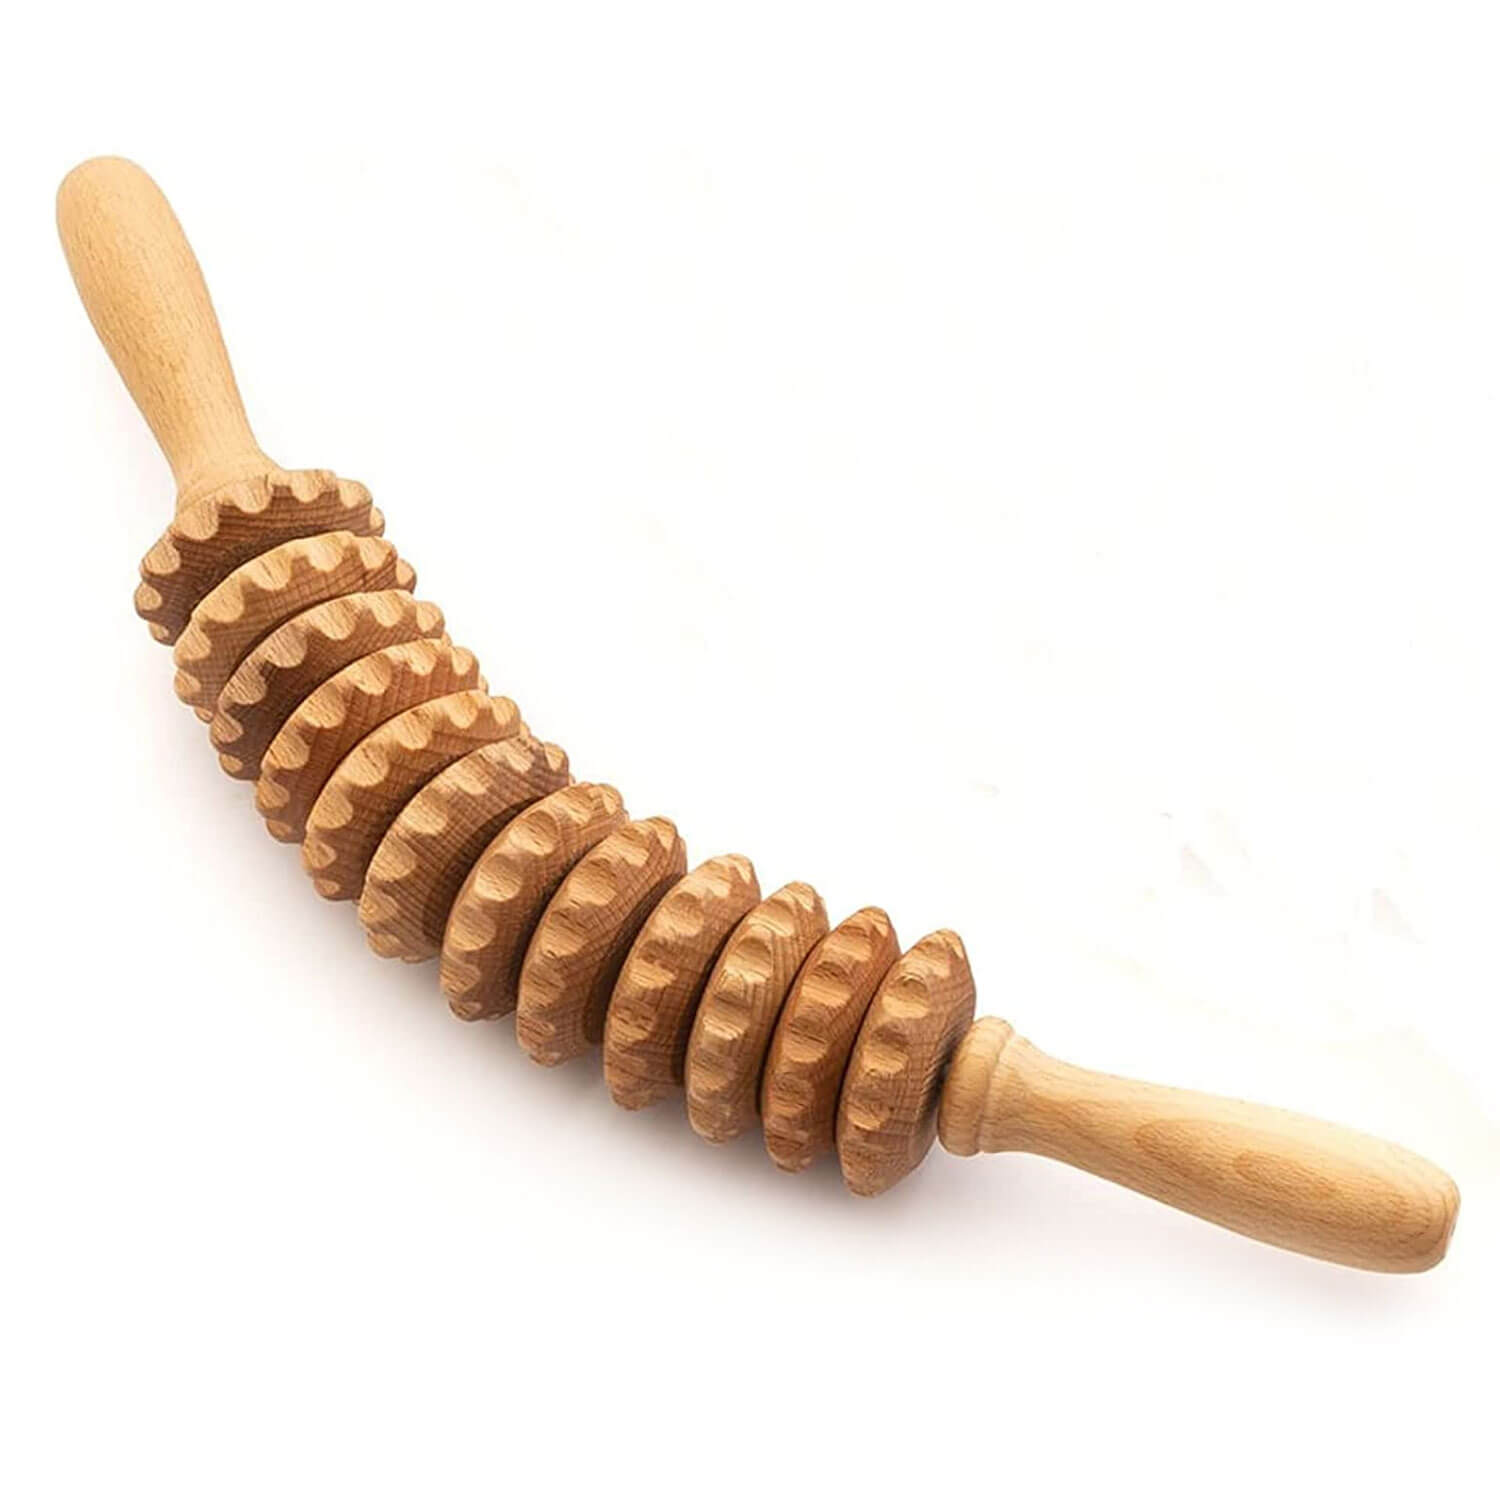 JOYLETUS Curved Wooden Massage Stick Roller for Anti Cellulite Lymphatic Drainage ,Wood Manual Self Therapy Massage Tools for Muscle Deep Tissue,Body